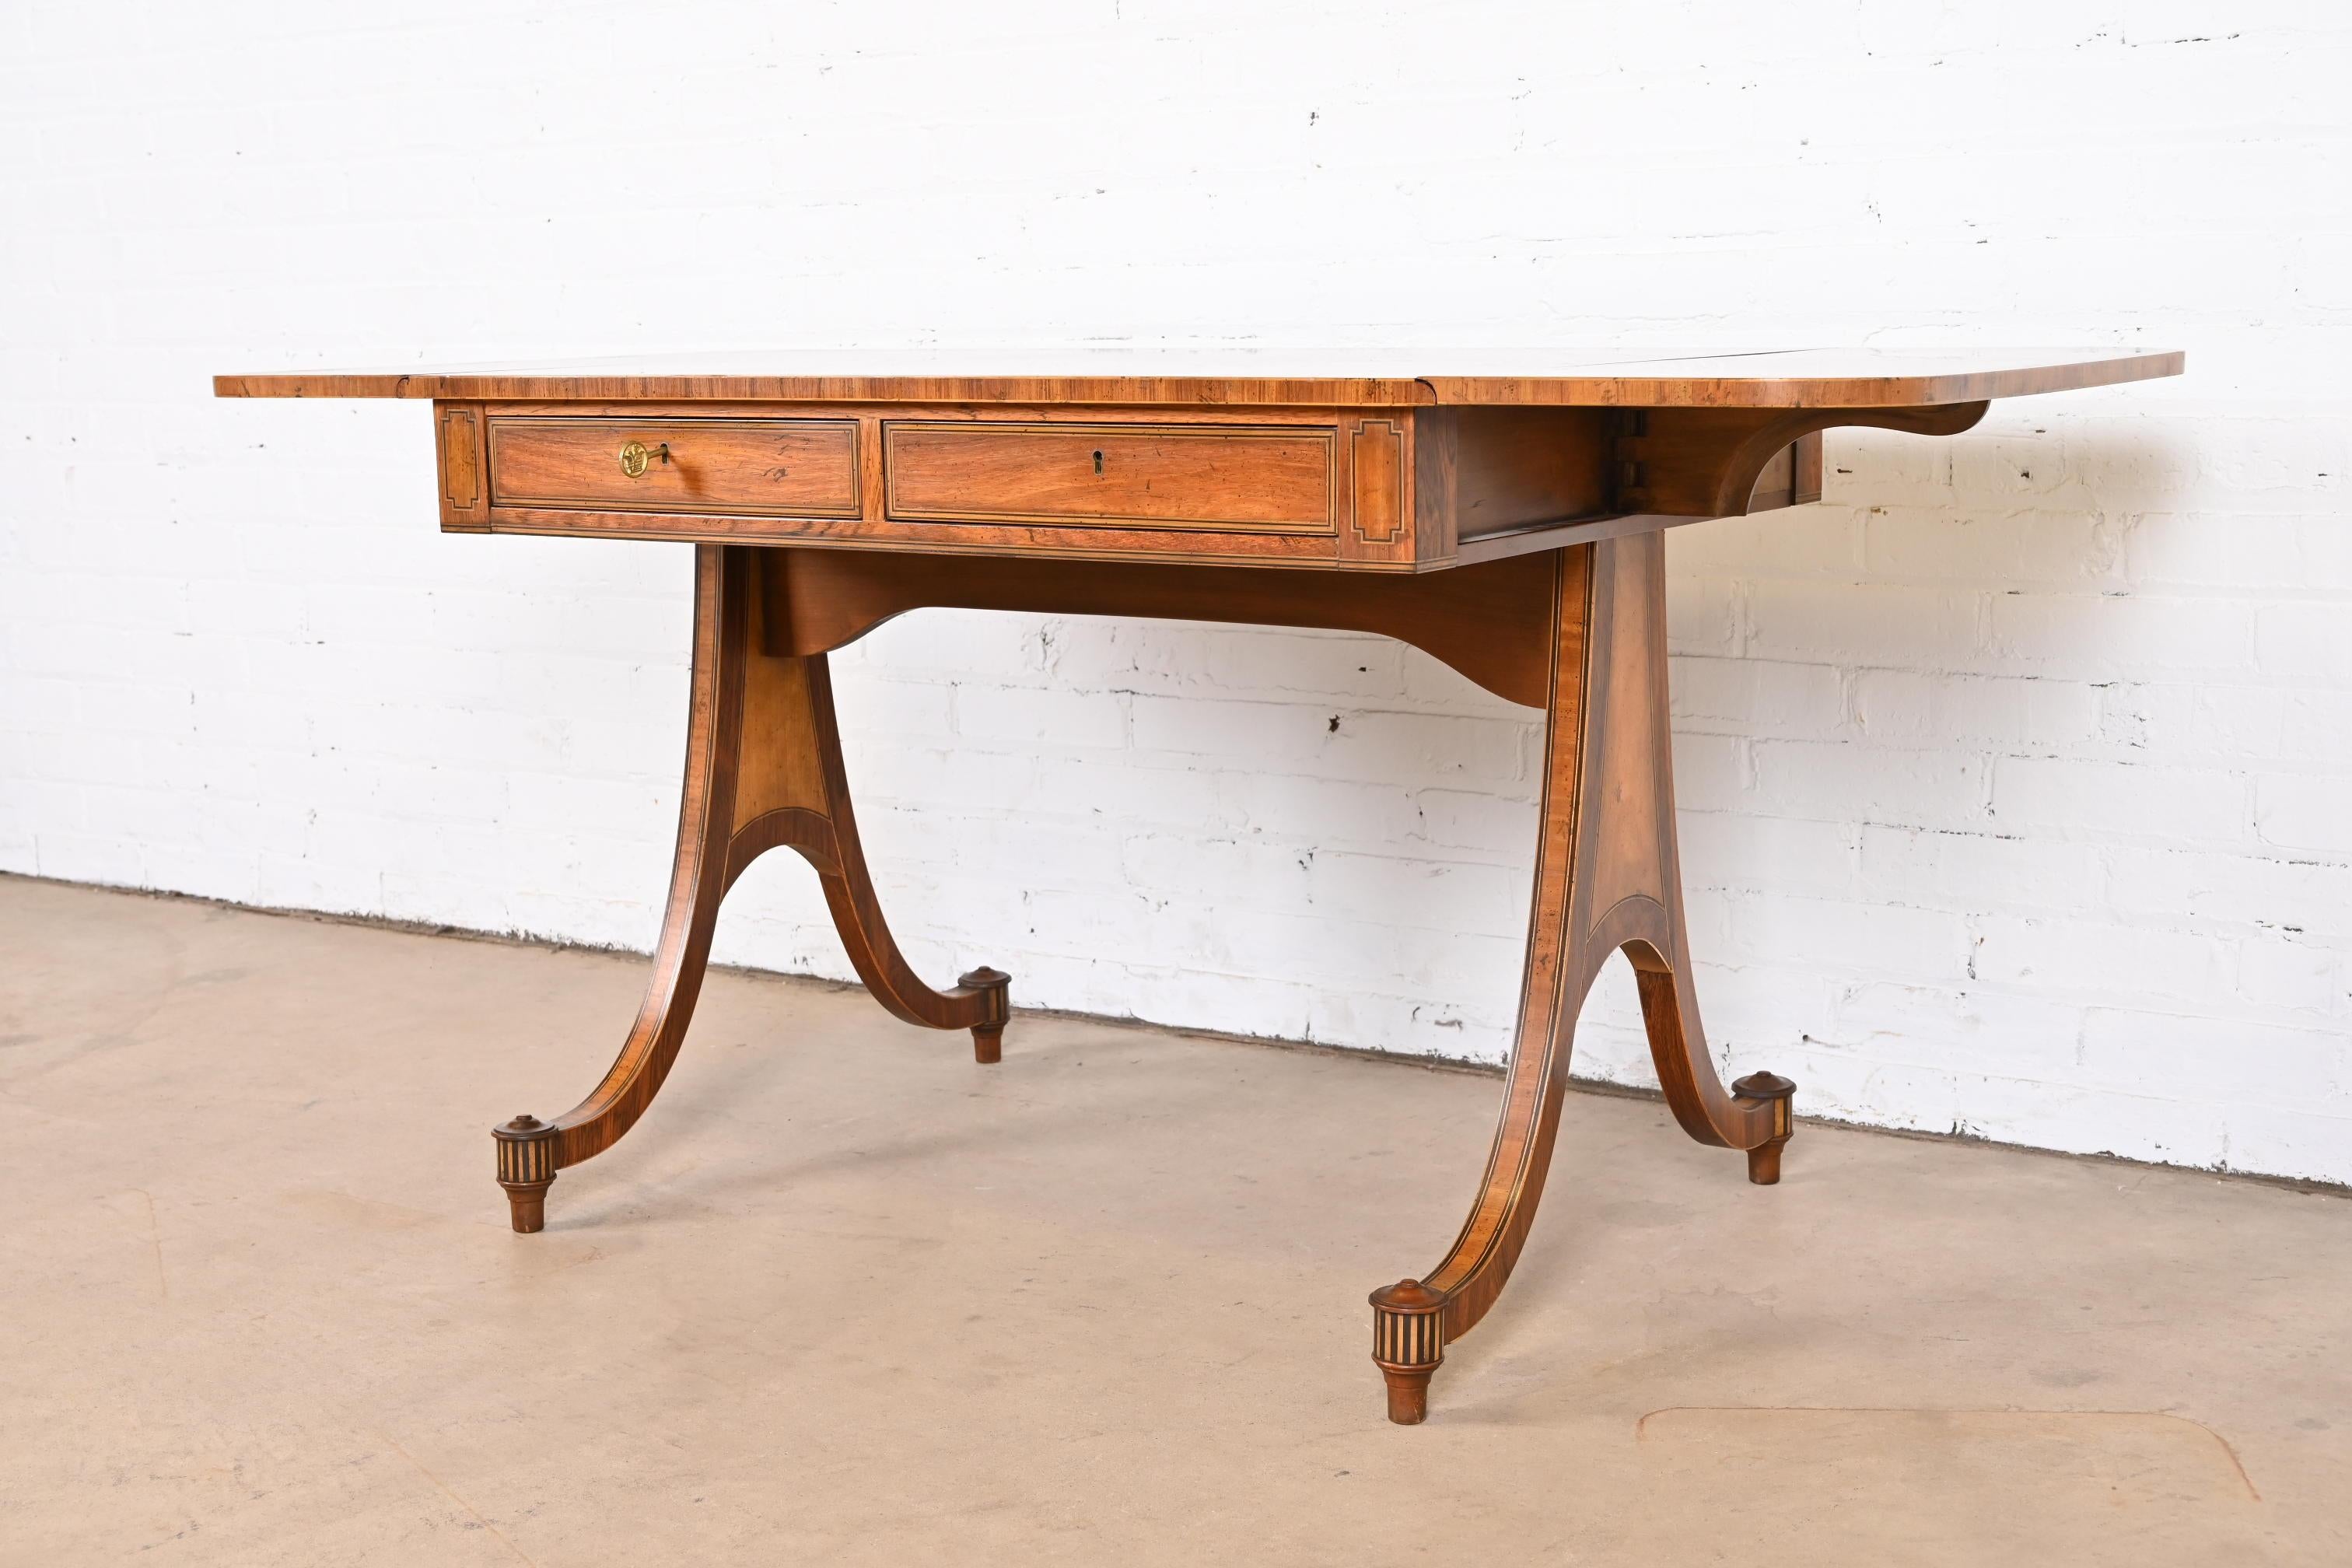 An exceptional Regency or Georgian style drop leaf writing desk or console table

By Baker Furniture

USA, circa 1960s

Walnut, with satinwood banding, and ebony and satinwood inlay. Drawers lock, and original key is included.

Measures: